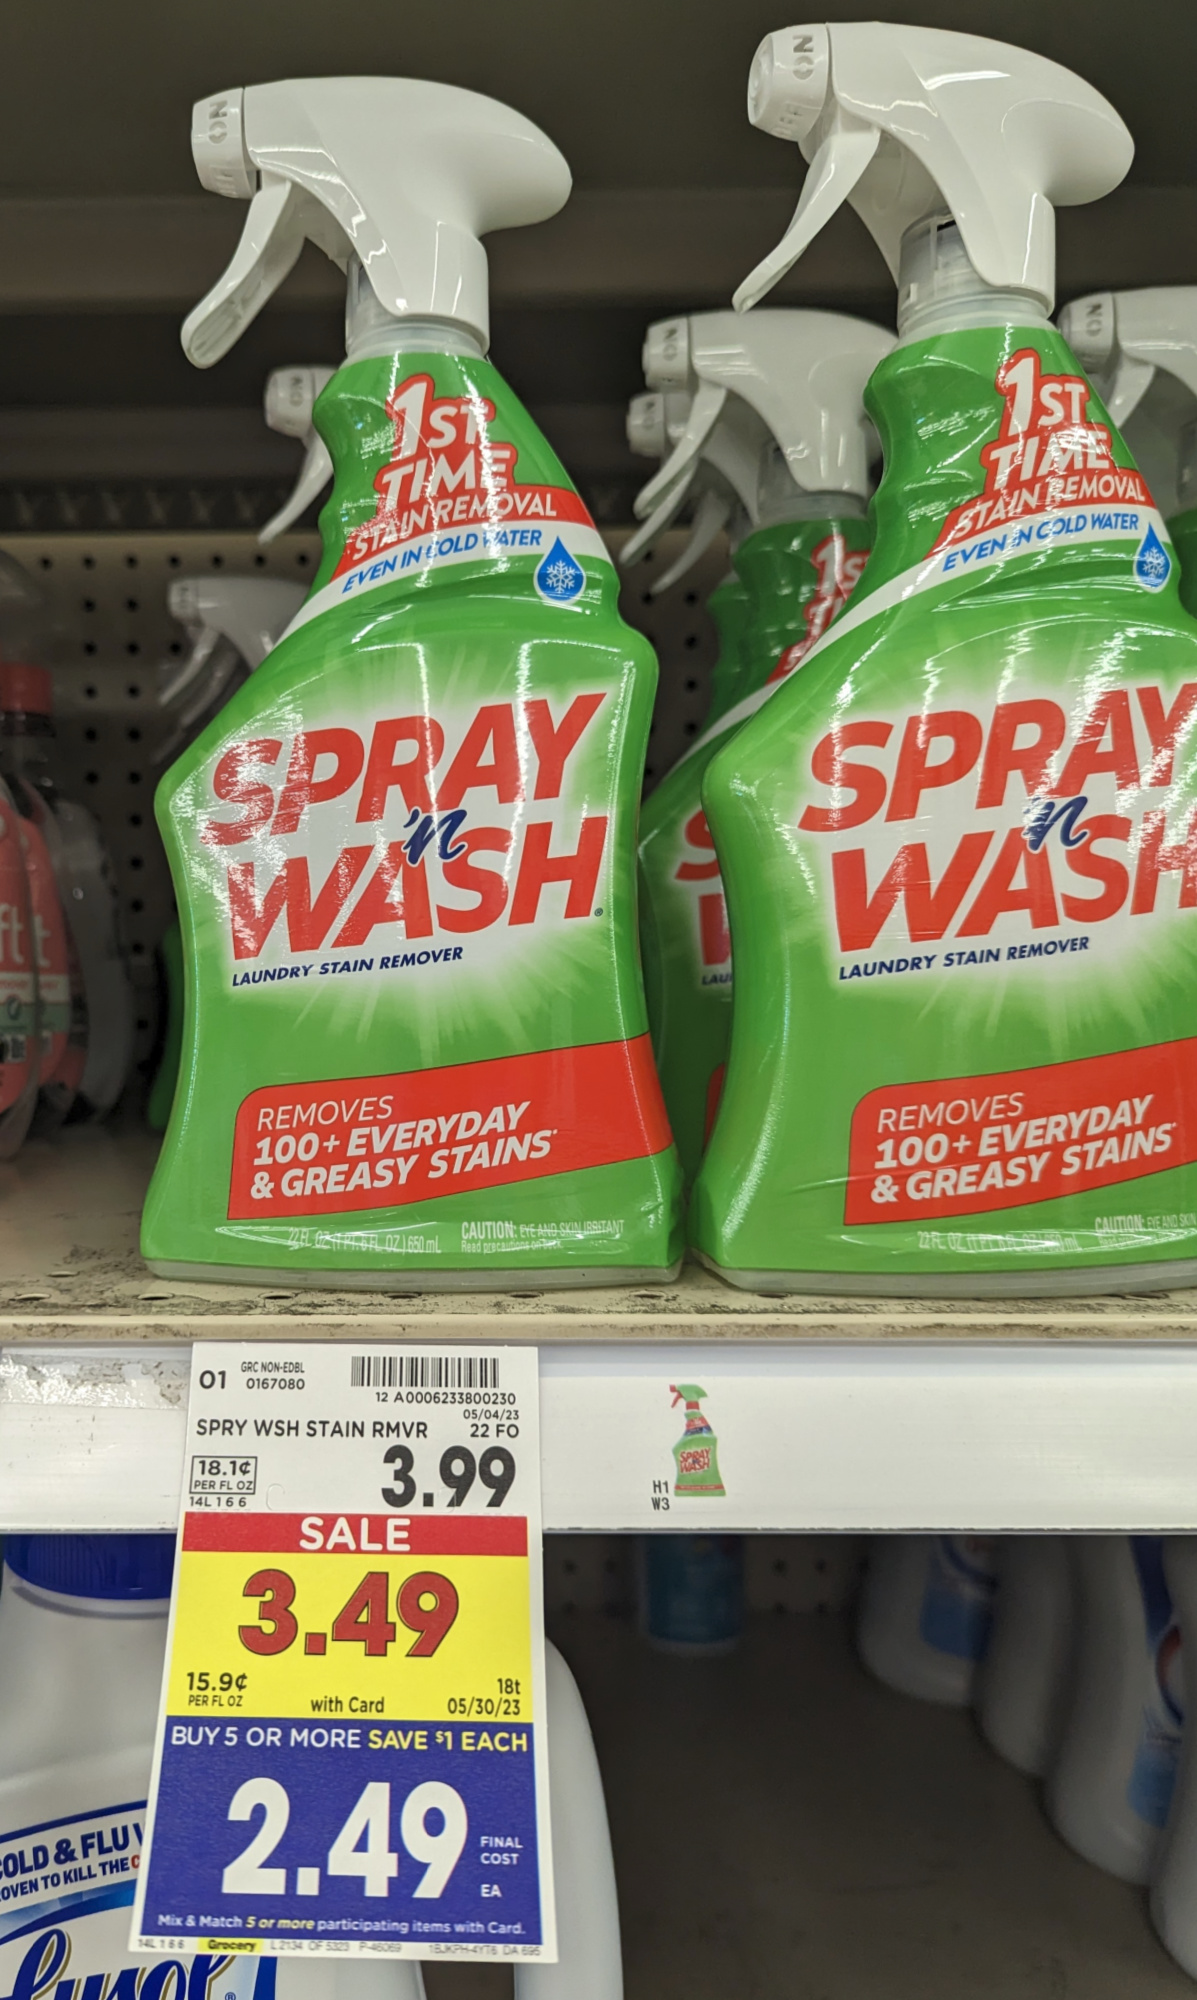 Spray 'N Wash Laundry Stain Remover Just $1.99 At Kroger